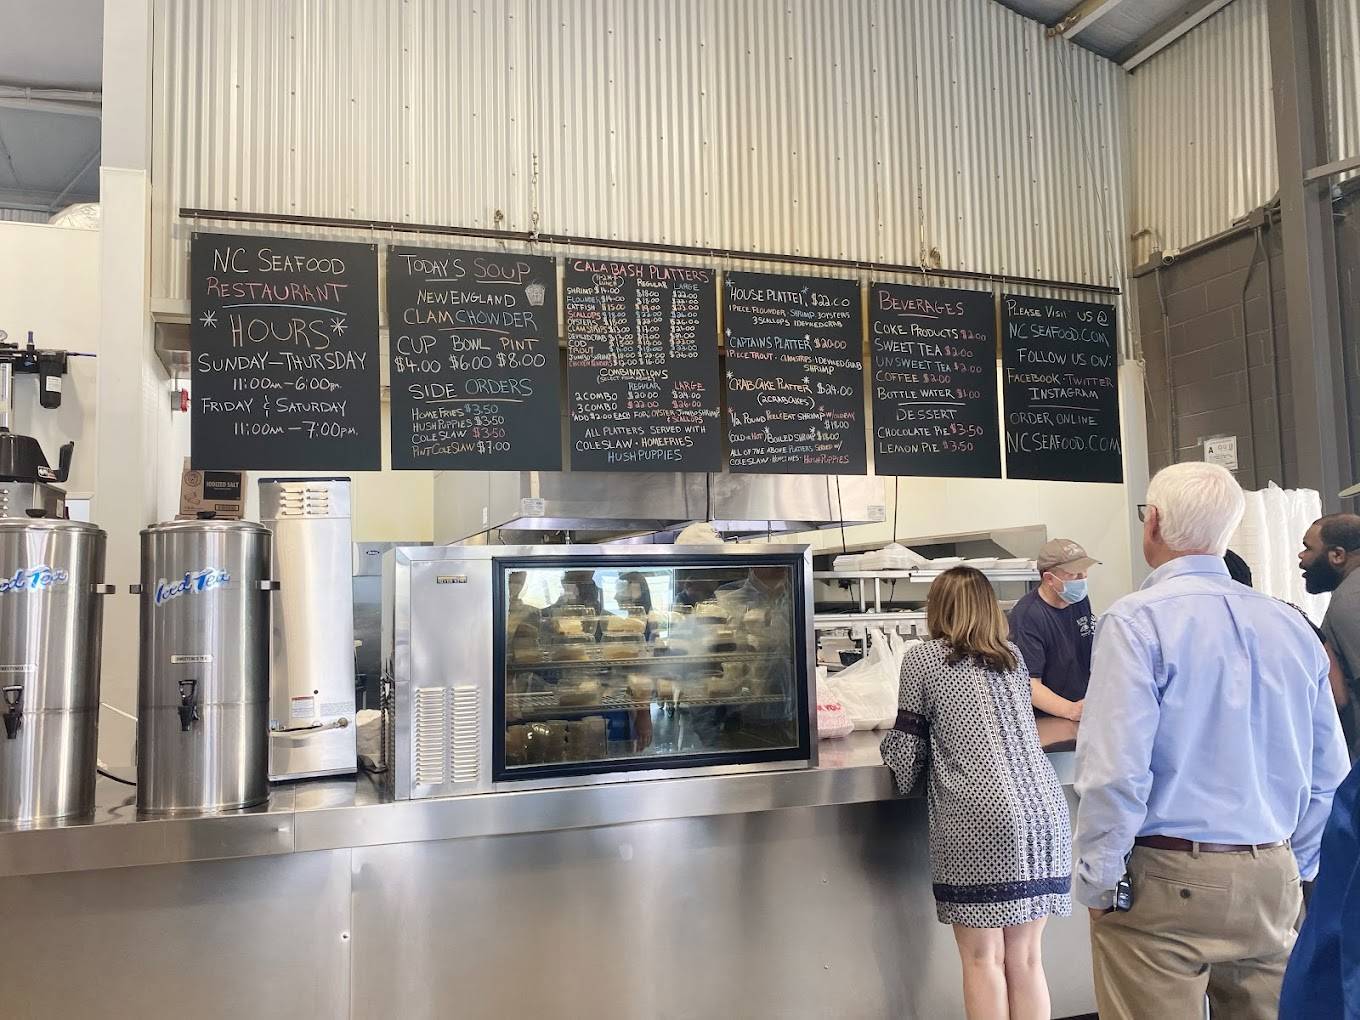 N.C. Seafood Restaurant at the Farmers Market in North Carolina